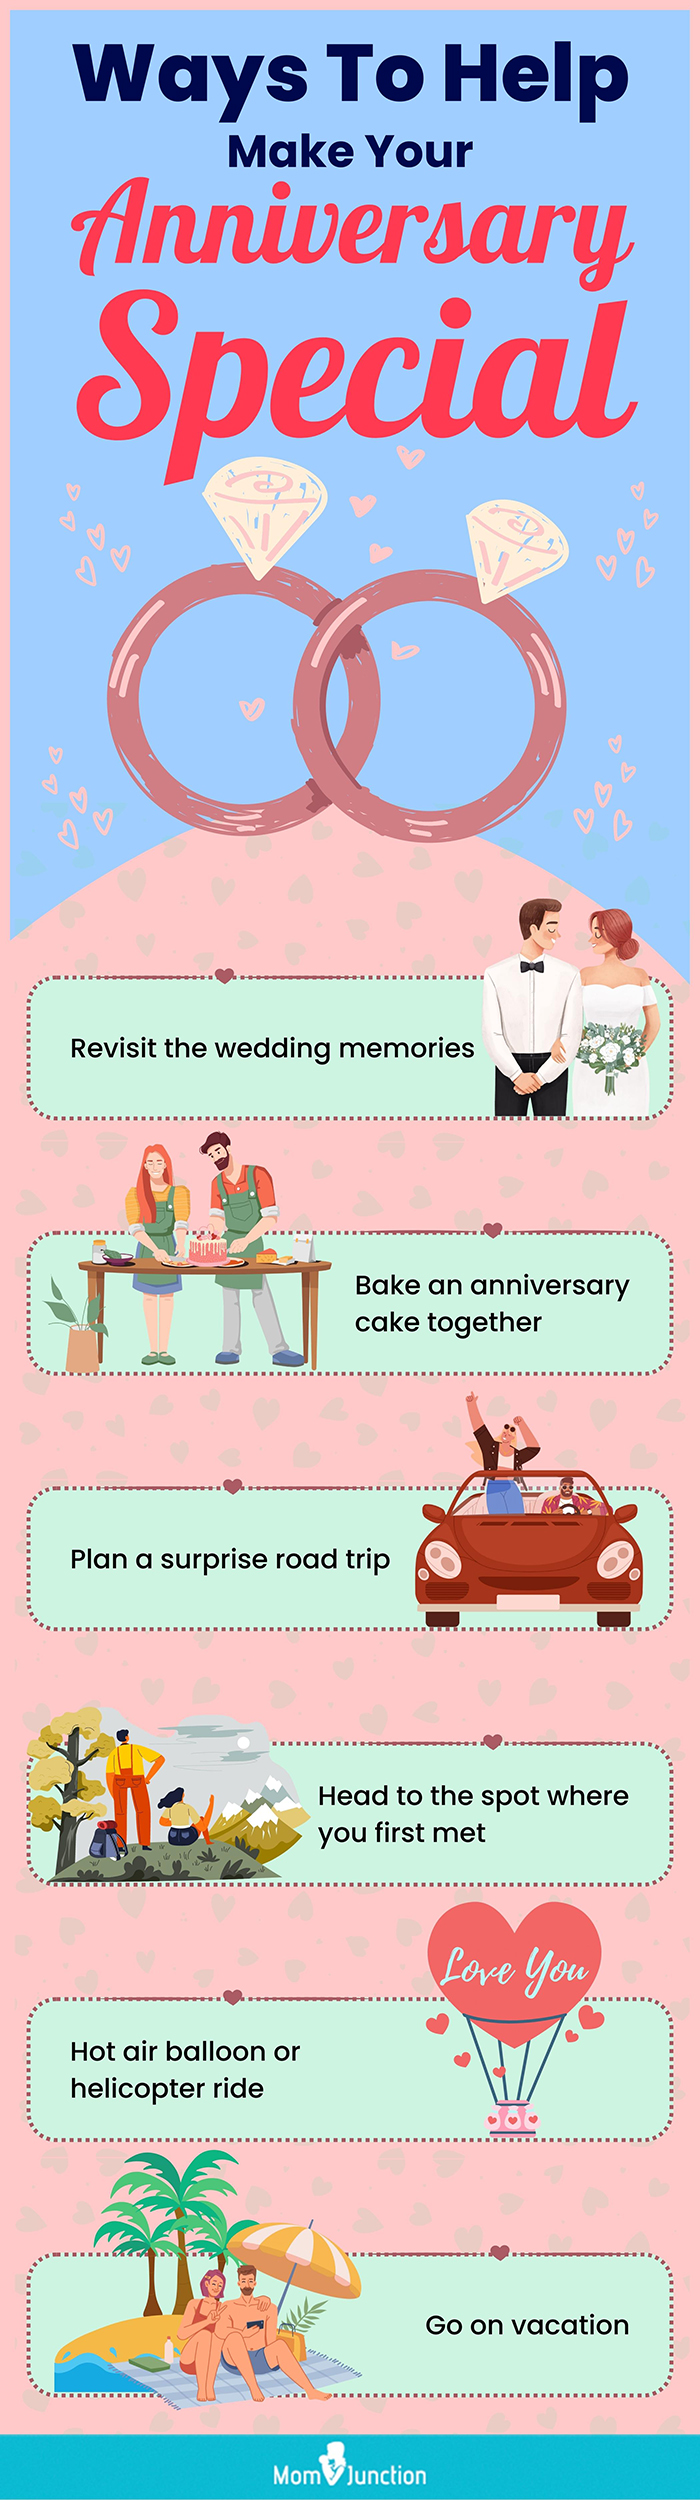 ways to help make your anniversary special (infographic)